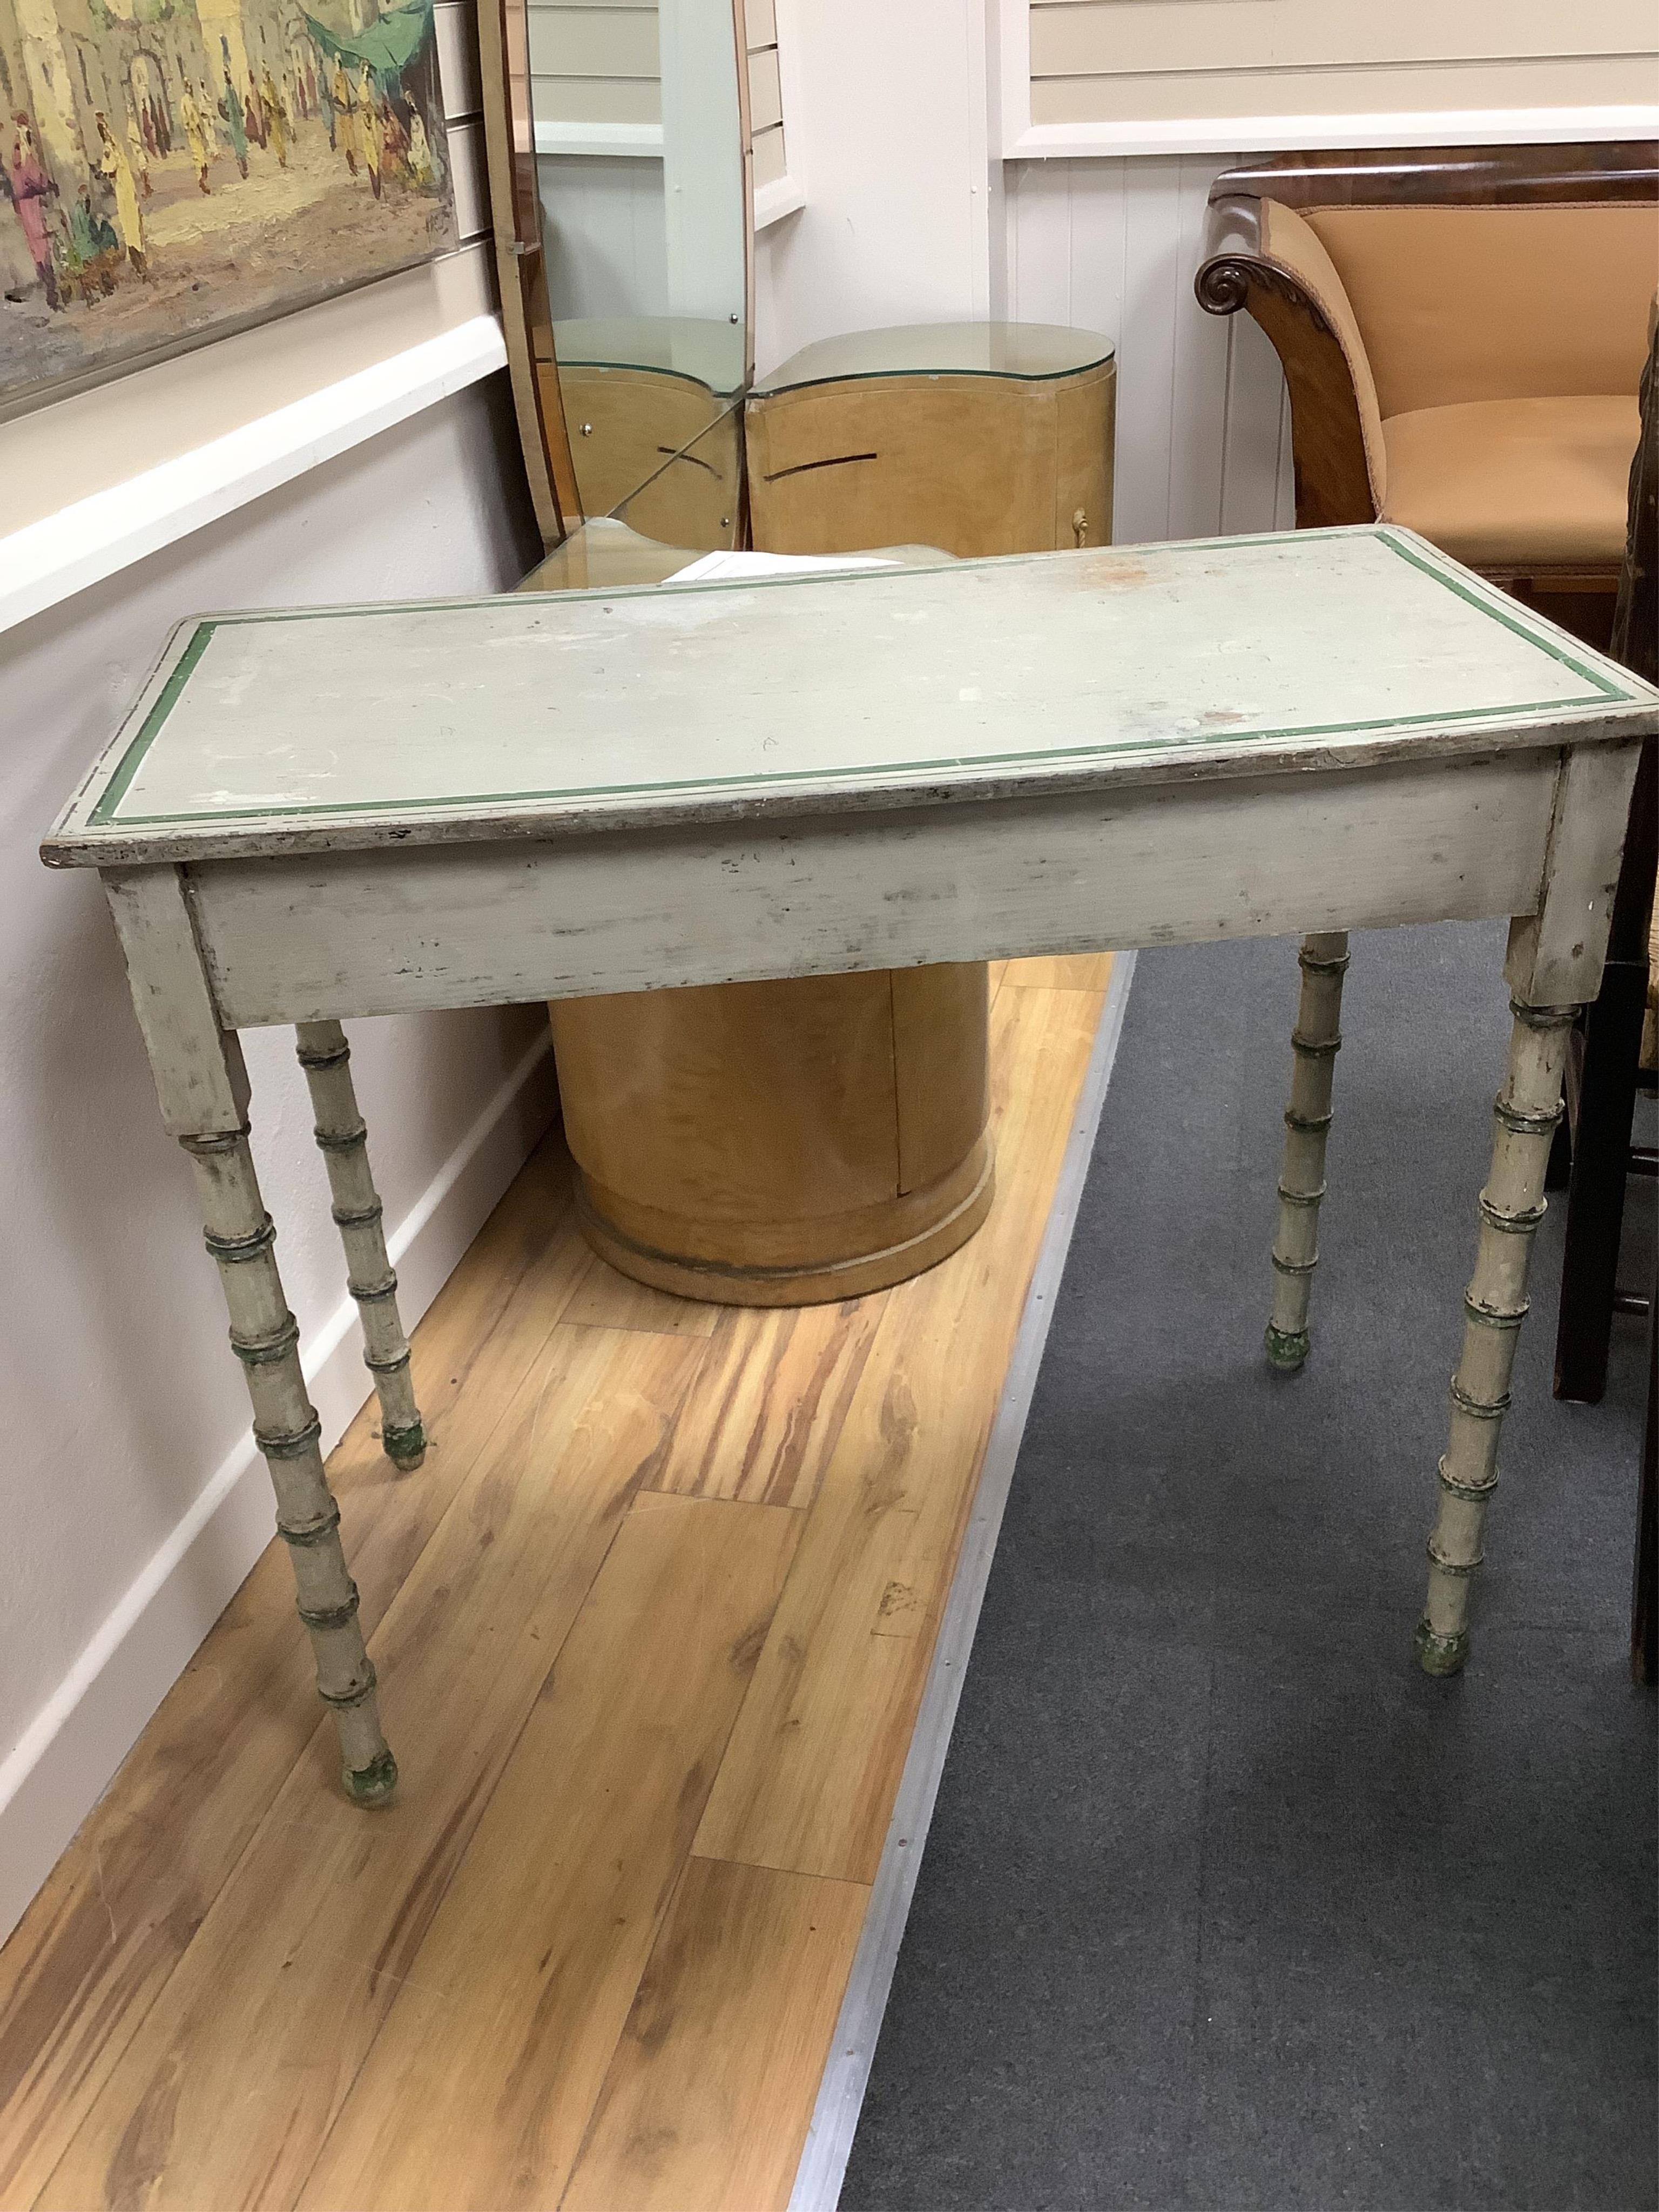 A Regency and later painted simulated bamboo side table in the manner of Colefax and Fowler, width 91cm, depth 44cm, height 78cm. Condition - fair